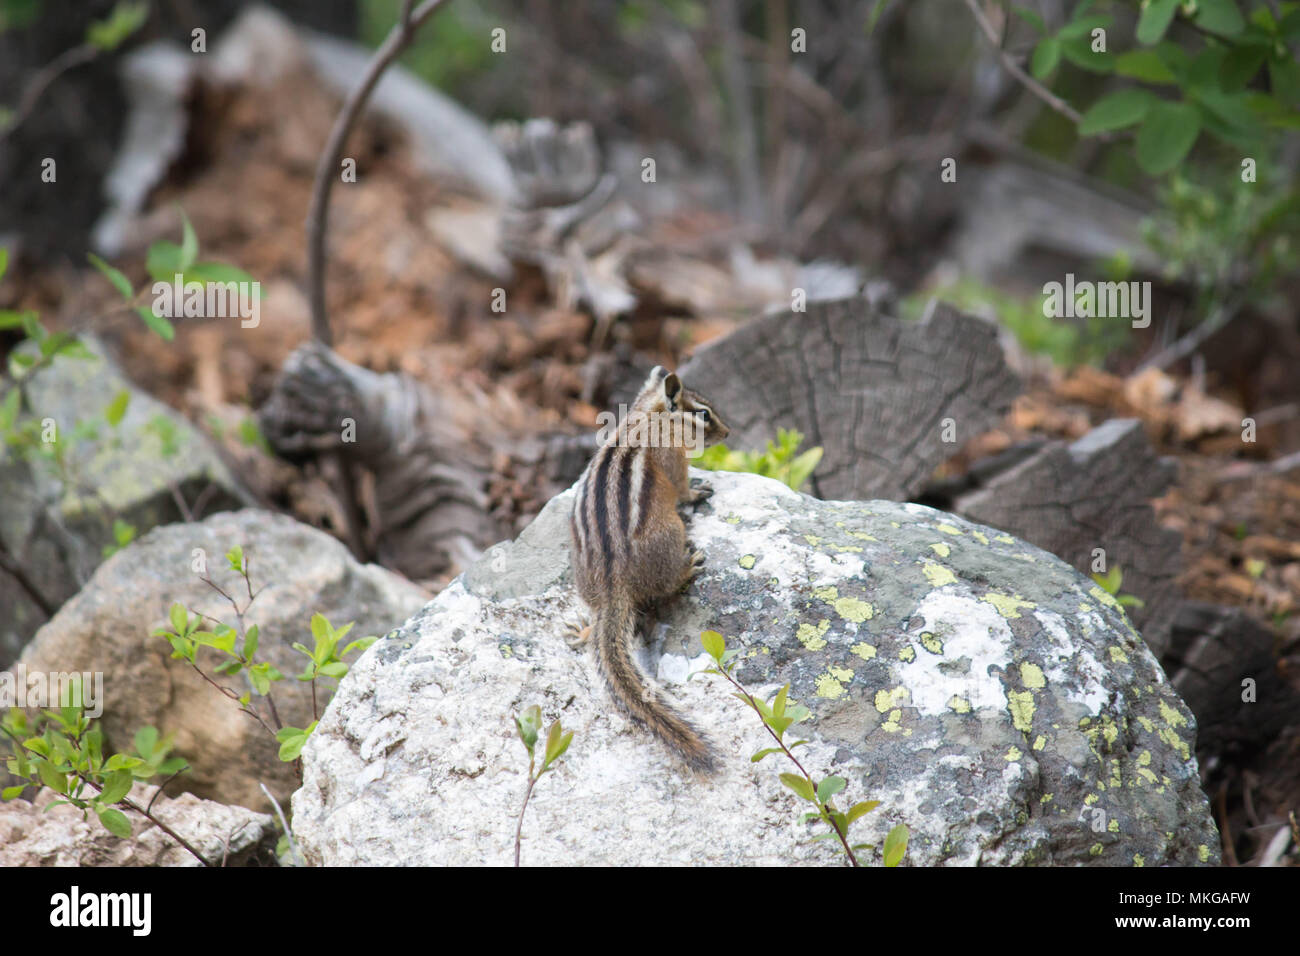 Golden-mantled ground squirrel on a rock, Yellowstone National Park, USA. You can see chipmunk strips and coloration on its back. Stock Photo